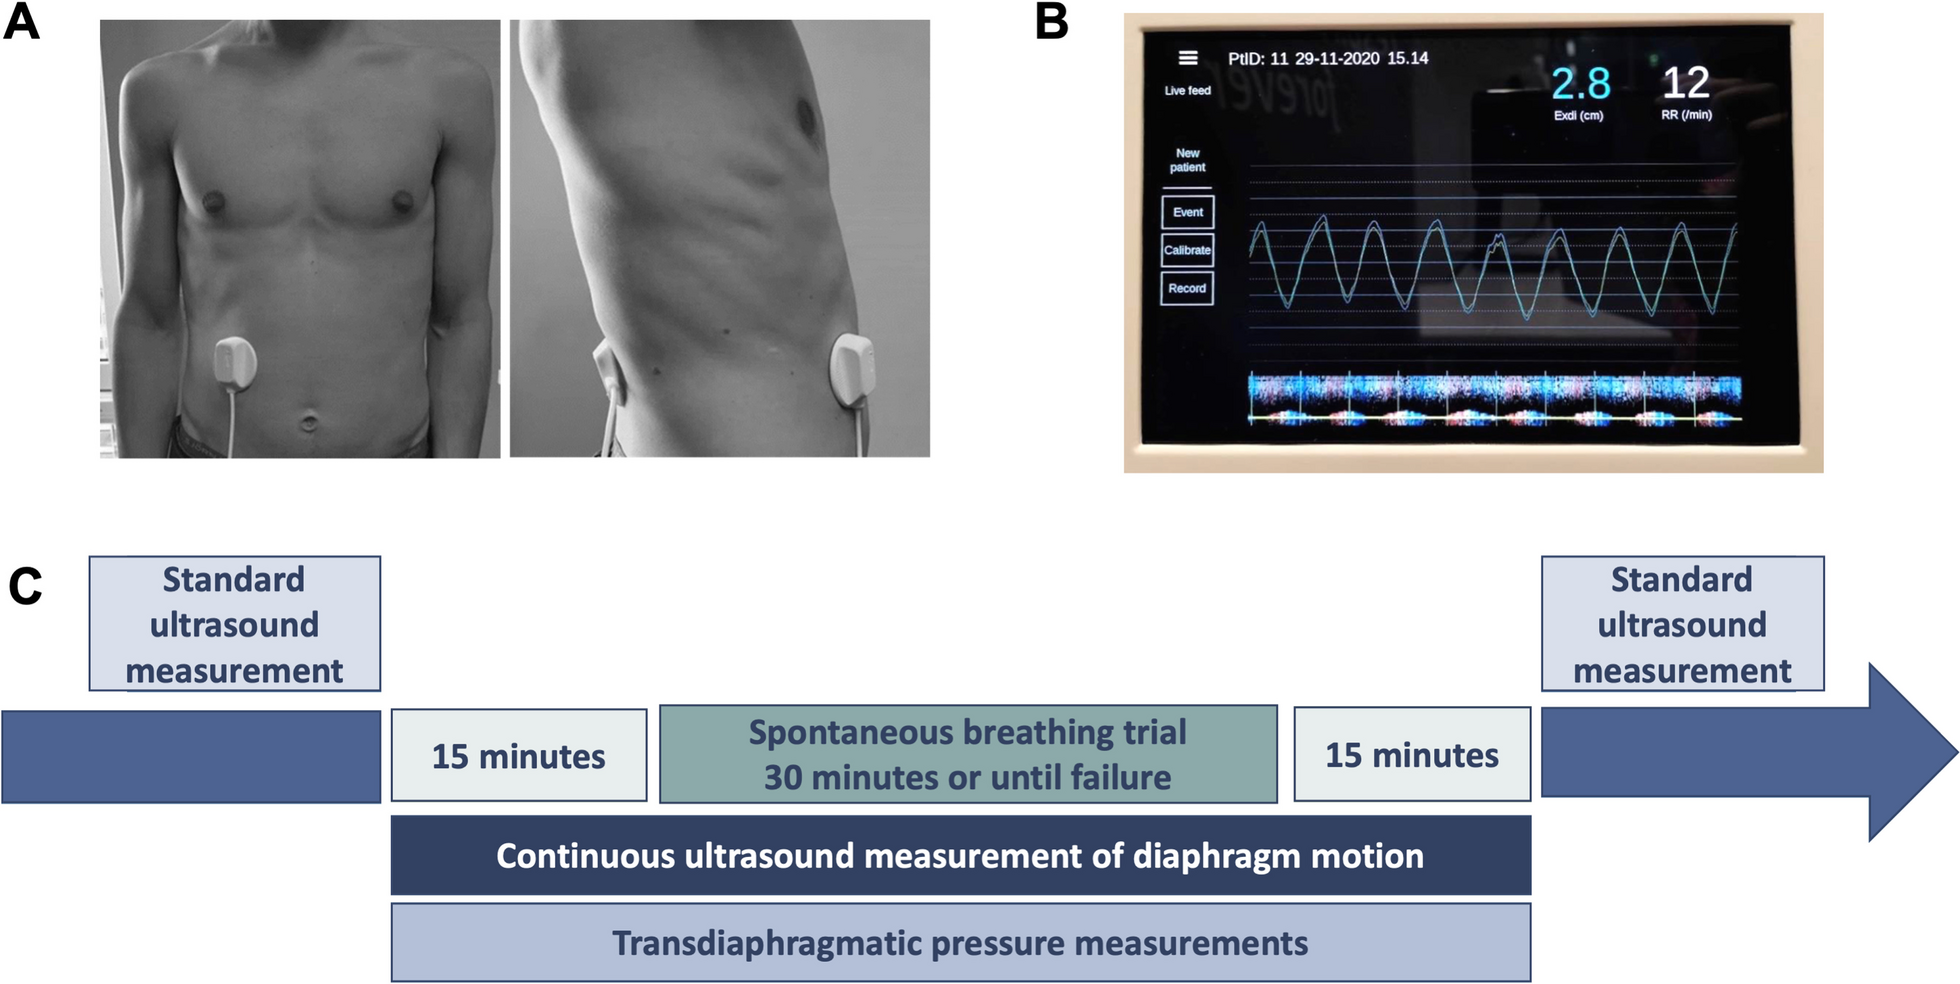 Operator independent continuous ultrasound monitoring of diaphragm excursion predicts successful weaning from mechanical ventilation: a prospective observational study